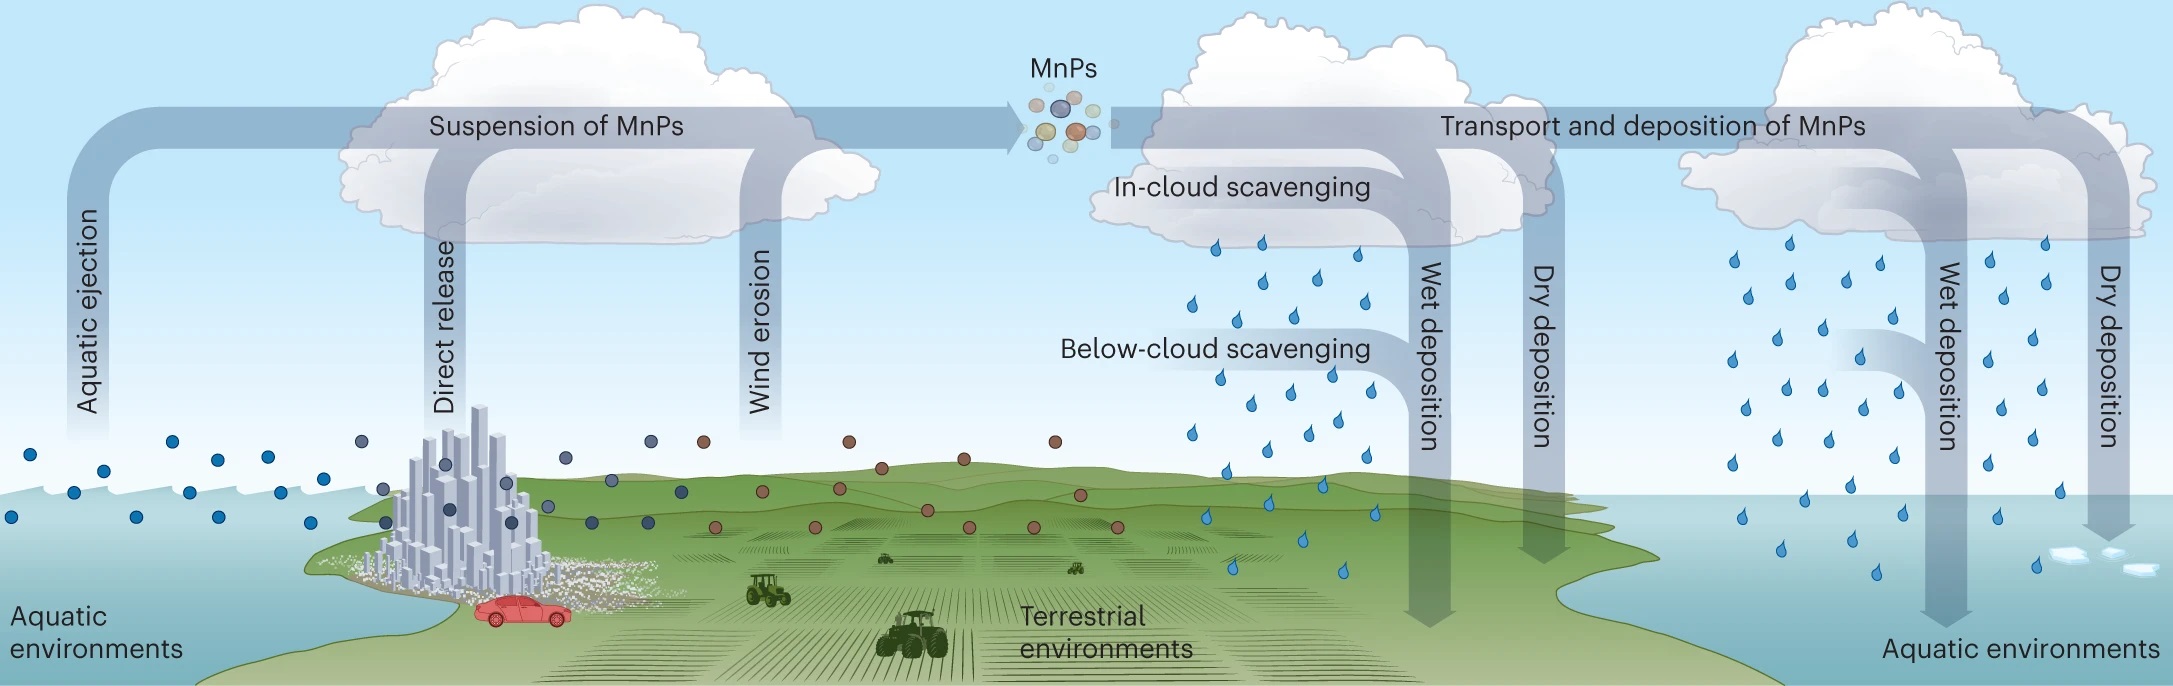 Enlarged view: Possible pathways for MnPs cycling in the atmosphere. The arrows depict suspension and deposition pathways to and from terrestrial and aquatic environments